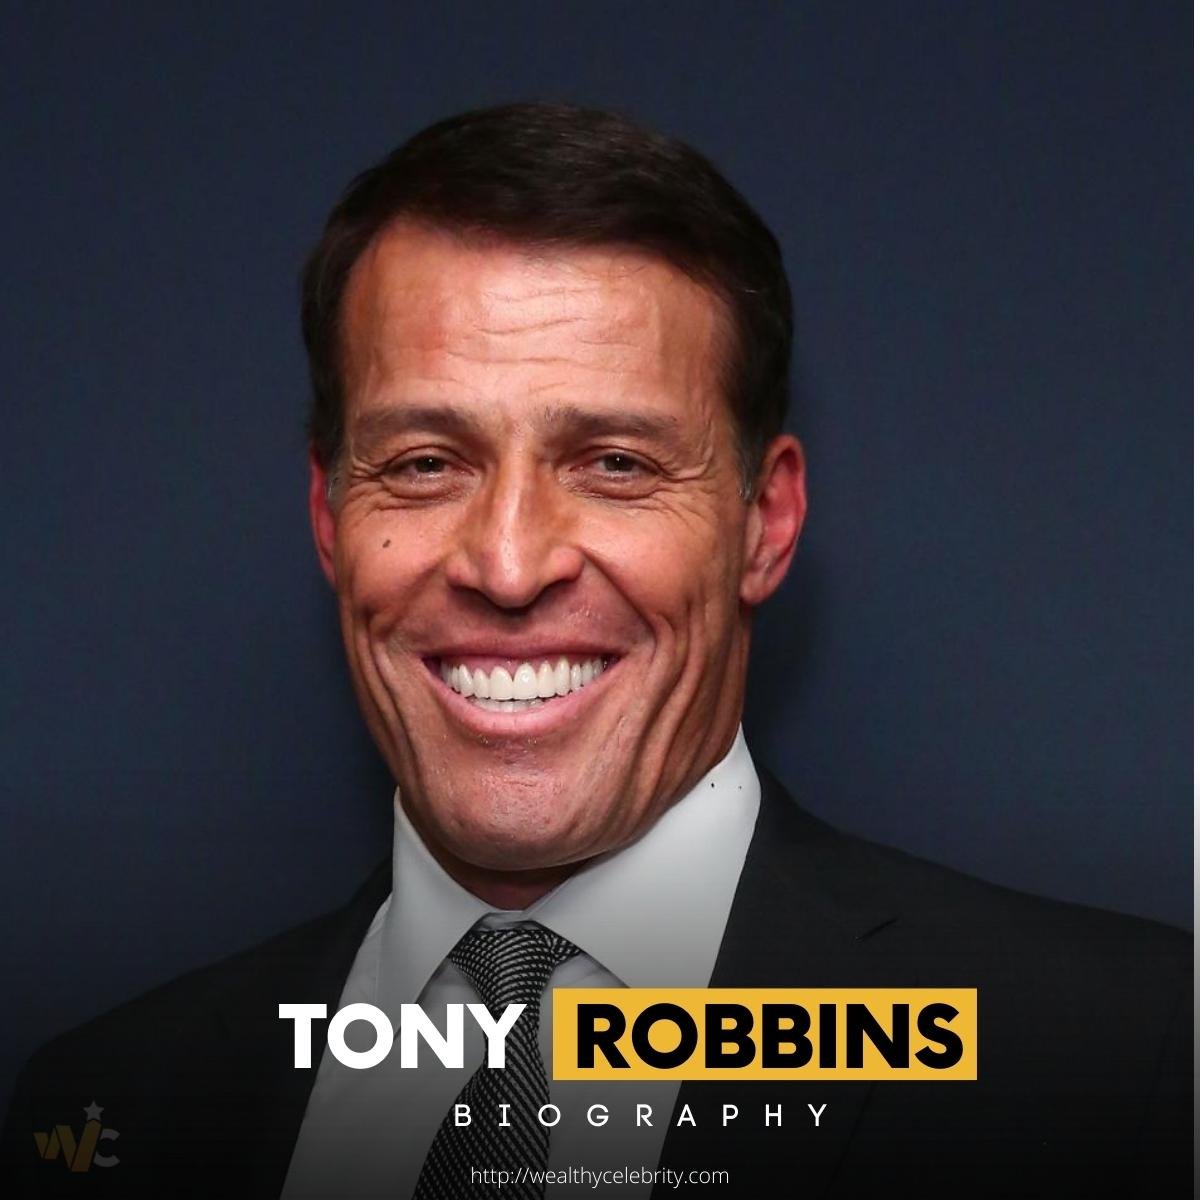 Let’s Talk About Tony Robbins’ Net Worth And Everything About His Life